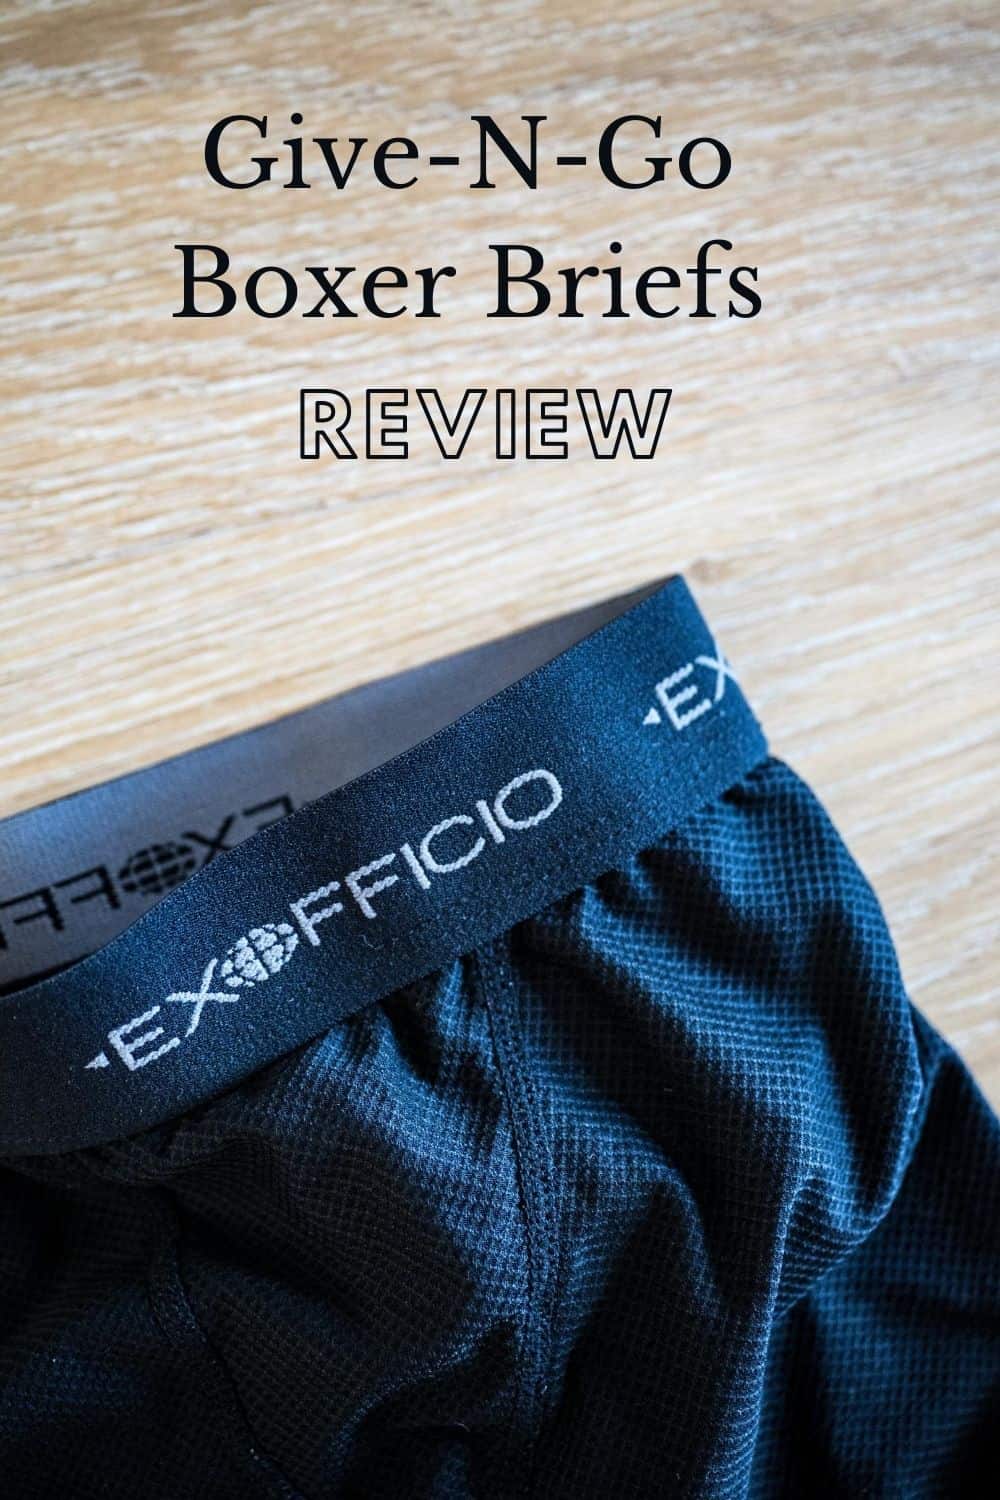 ExOfficio Boxers Review - Give-N-Go for Men